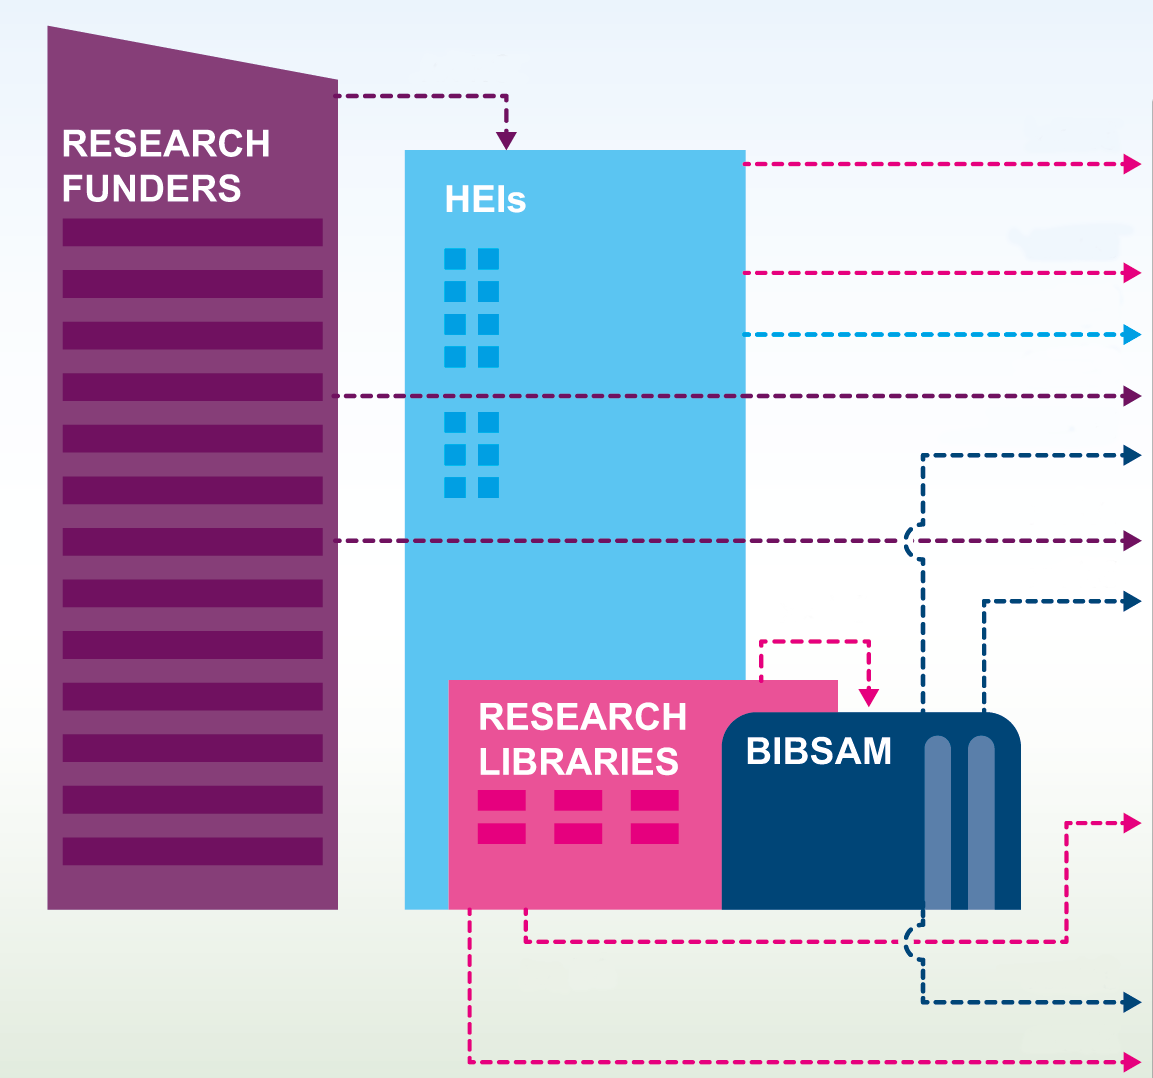 Infographics showing the flow of money between Research funders, HEIs, research libraries and Bibsam consortium.